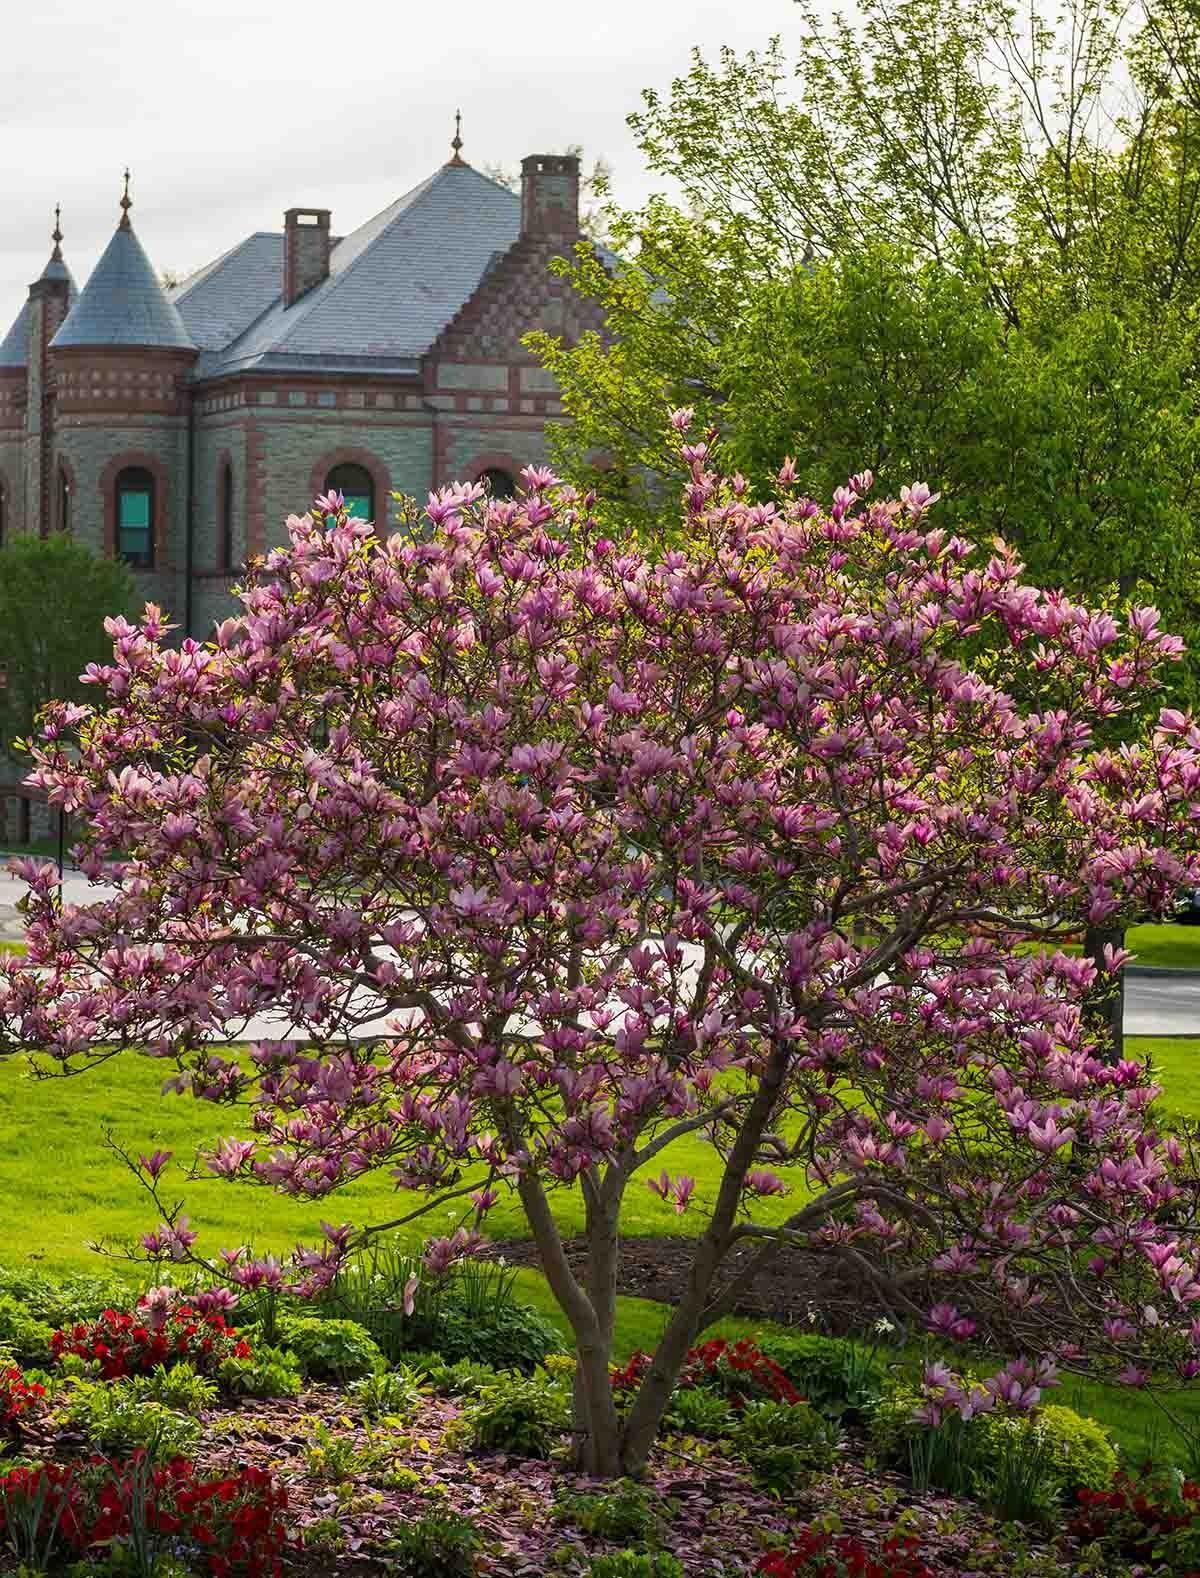 Colgate campus with blossoming trees